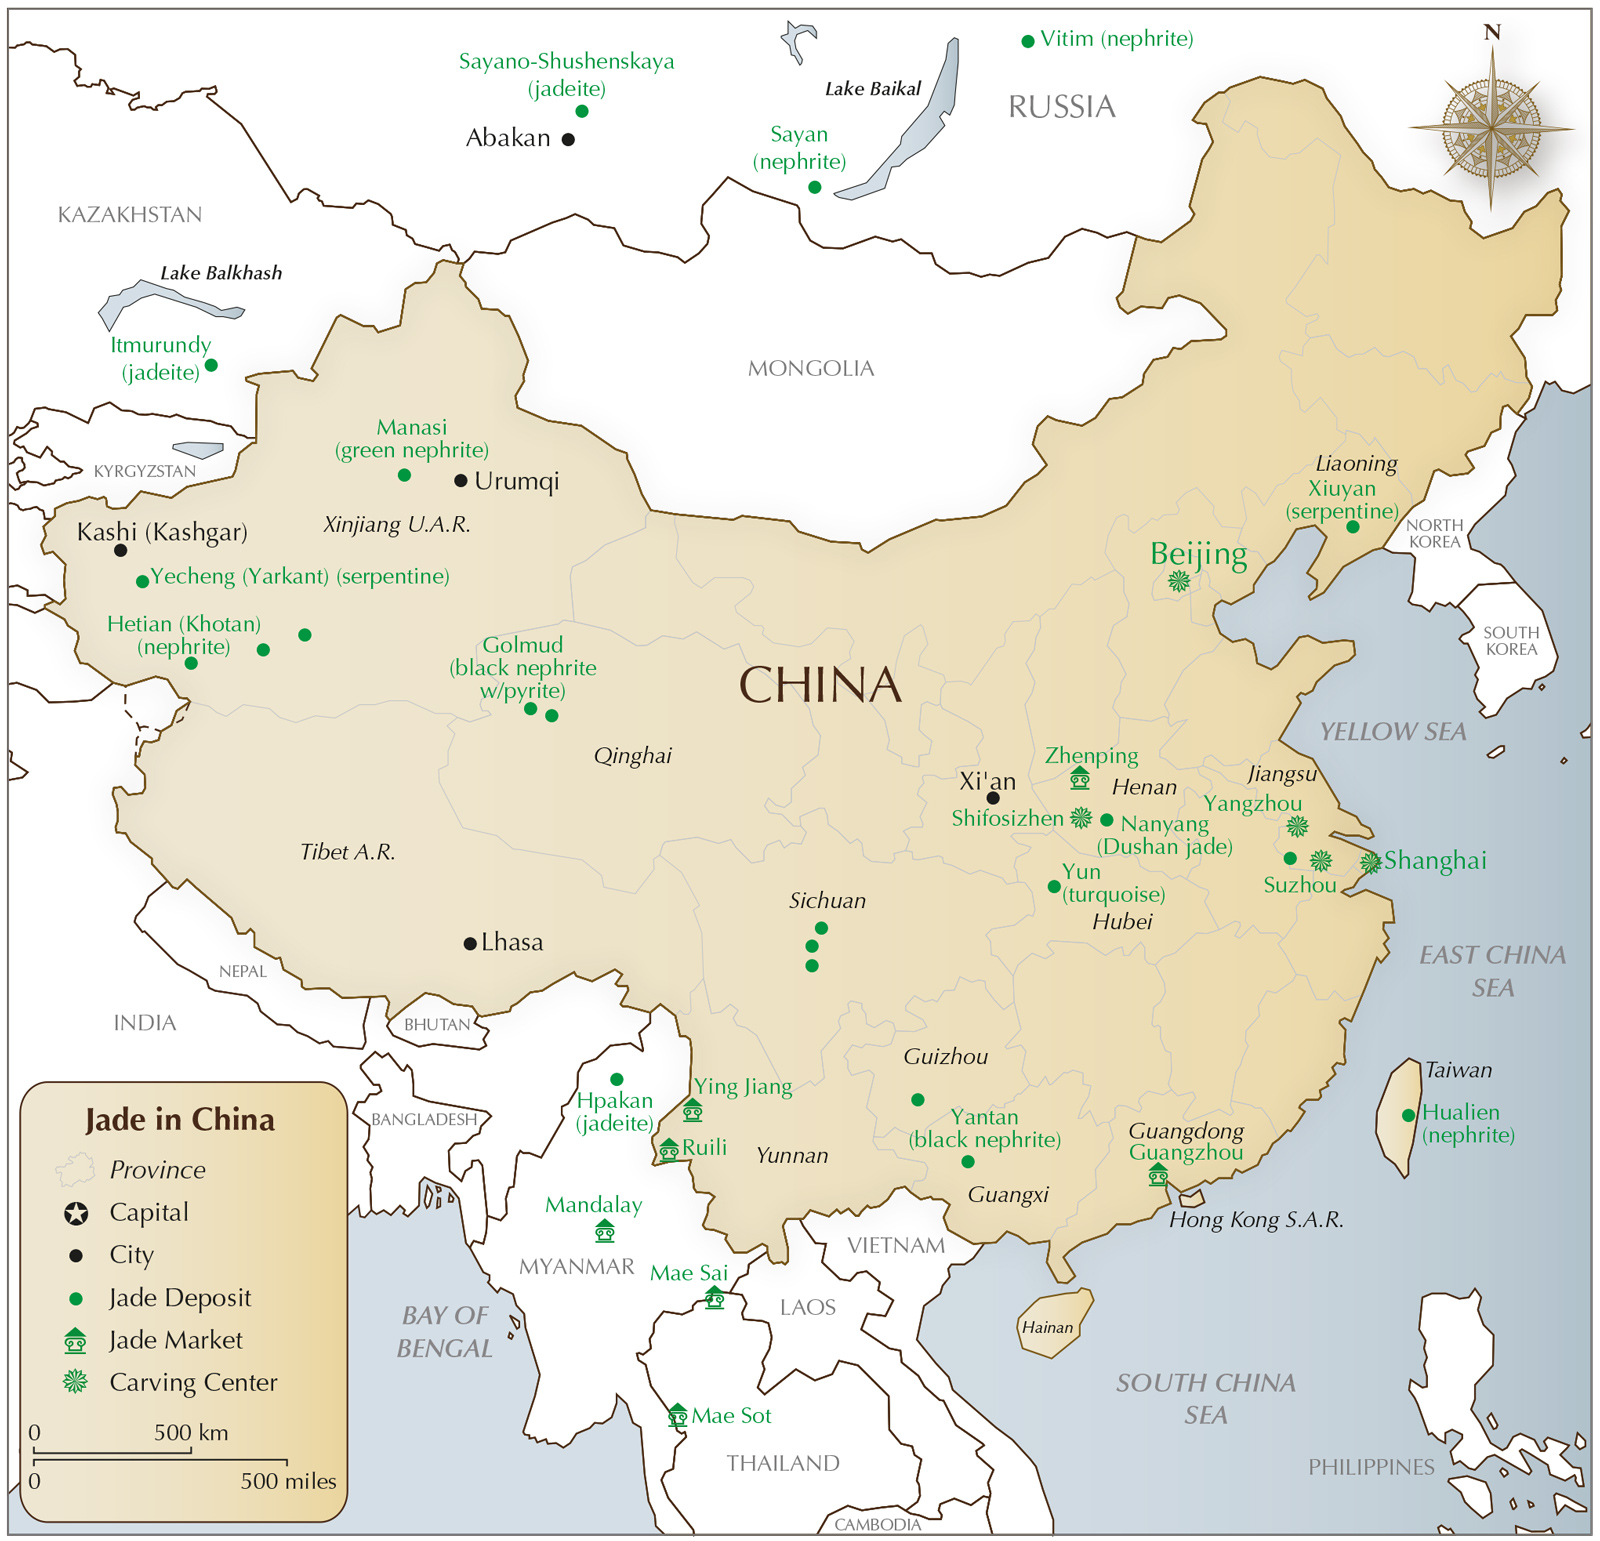 Map of China showing the location of jade mines and markets, from Lotus Gemology